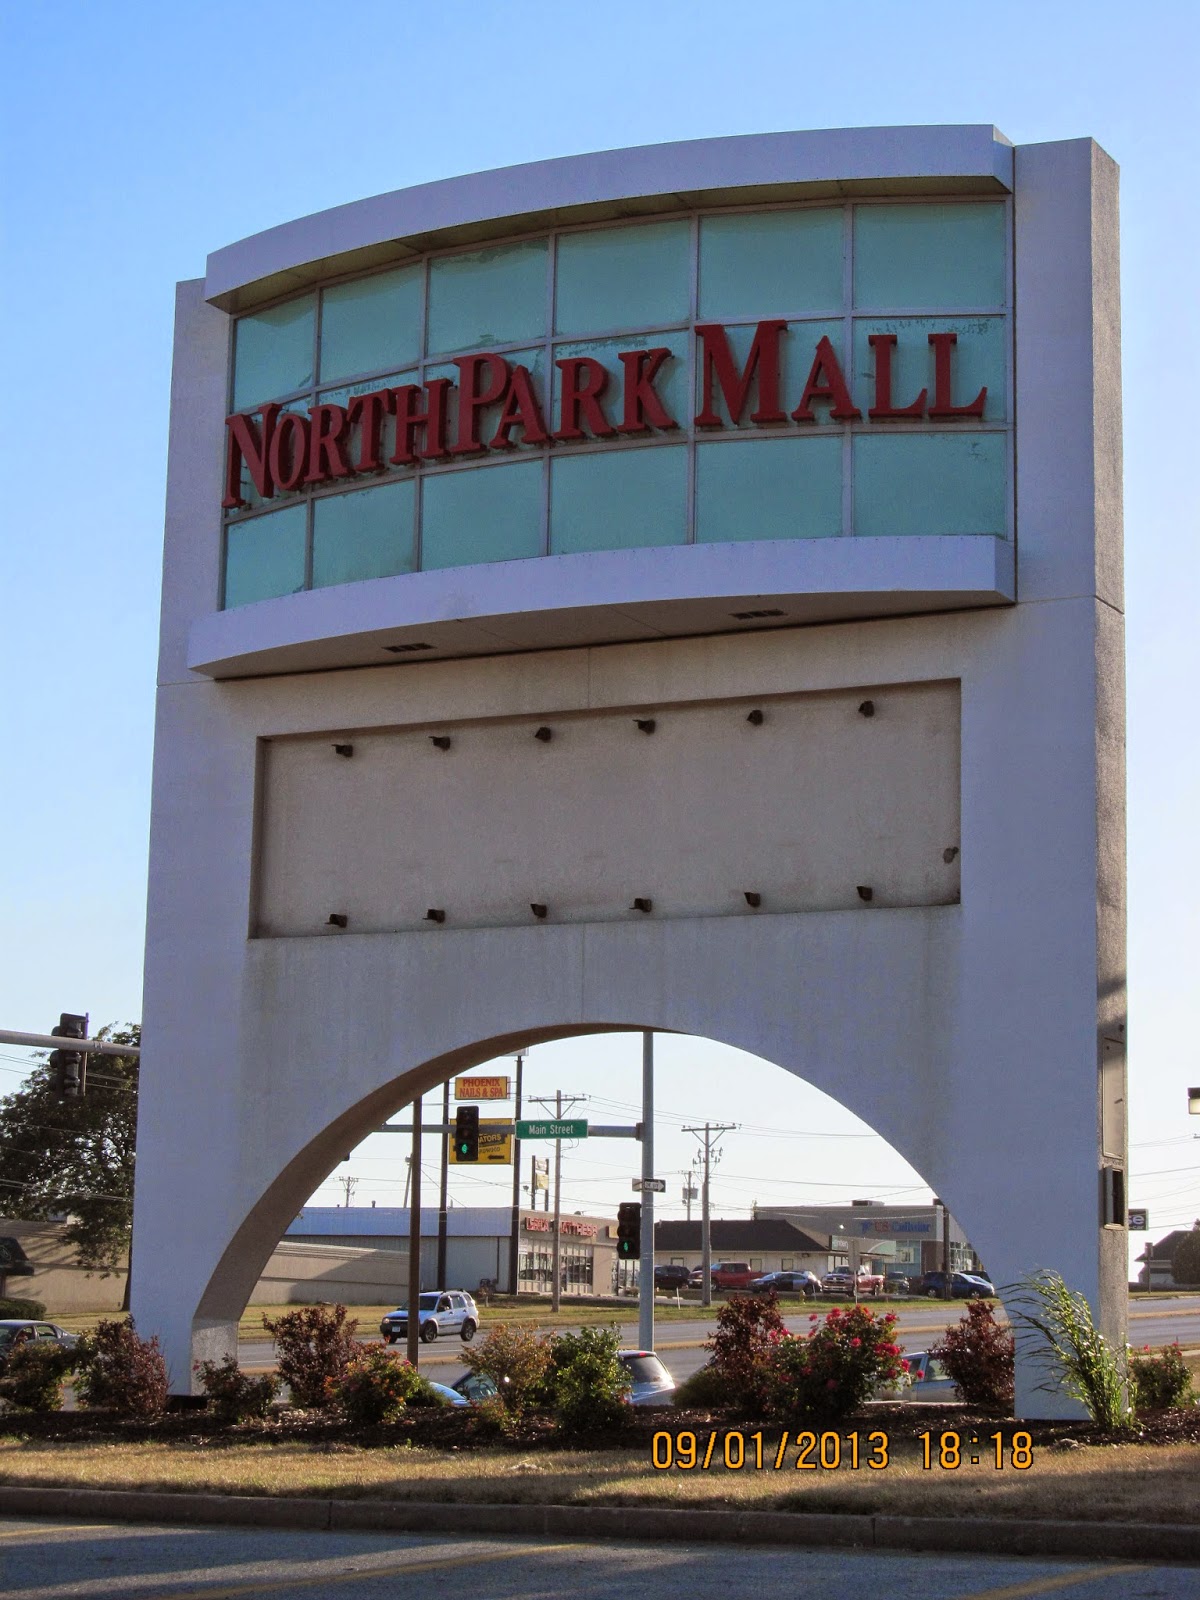 Trip to the Mall: North Park Mall- (Davenport, IL)